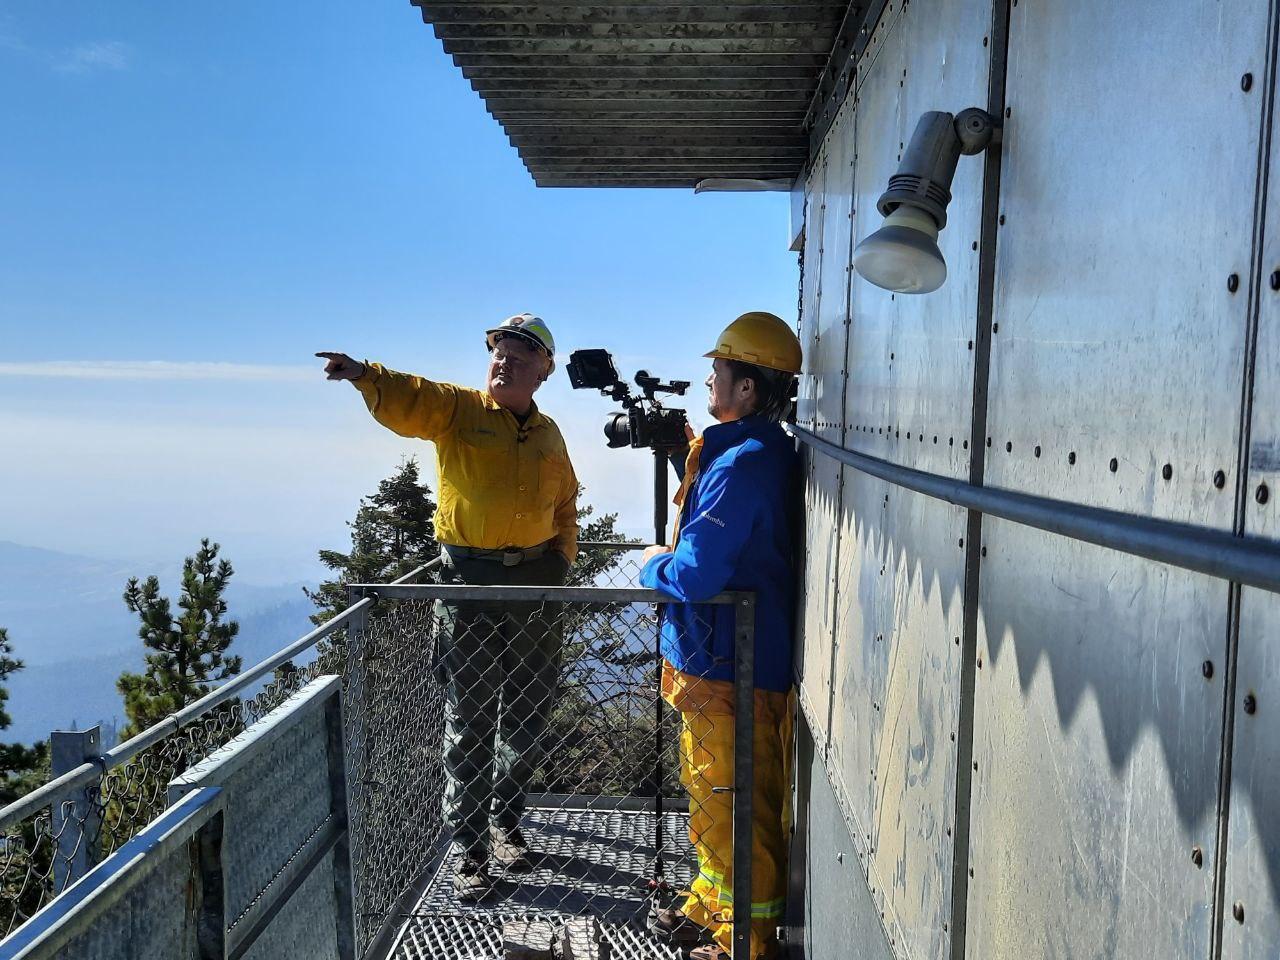 One person interviews another on top of a catwalk on a fire tower